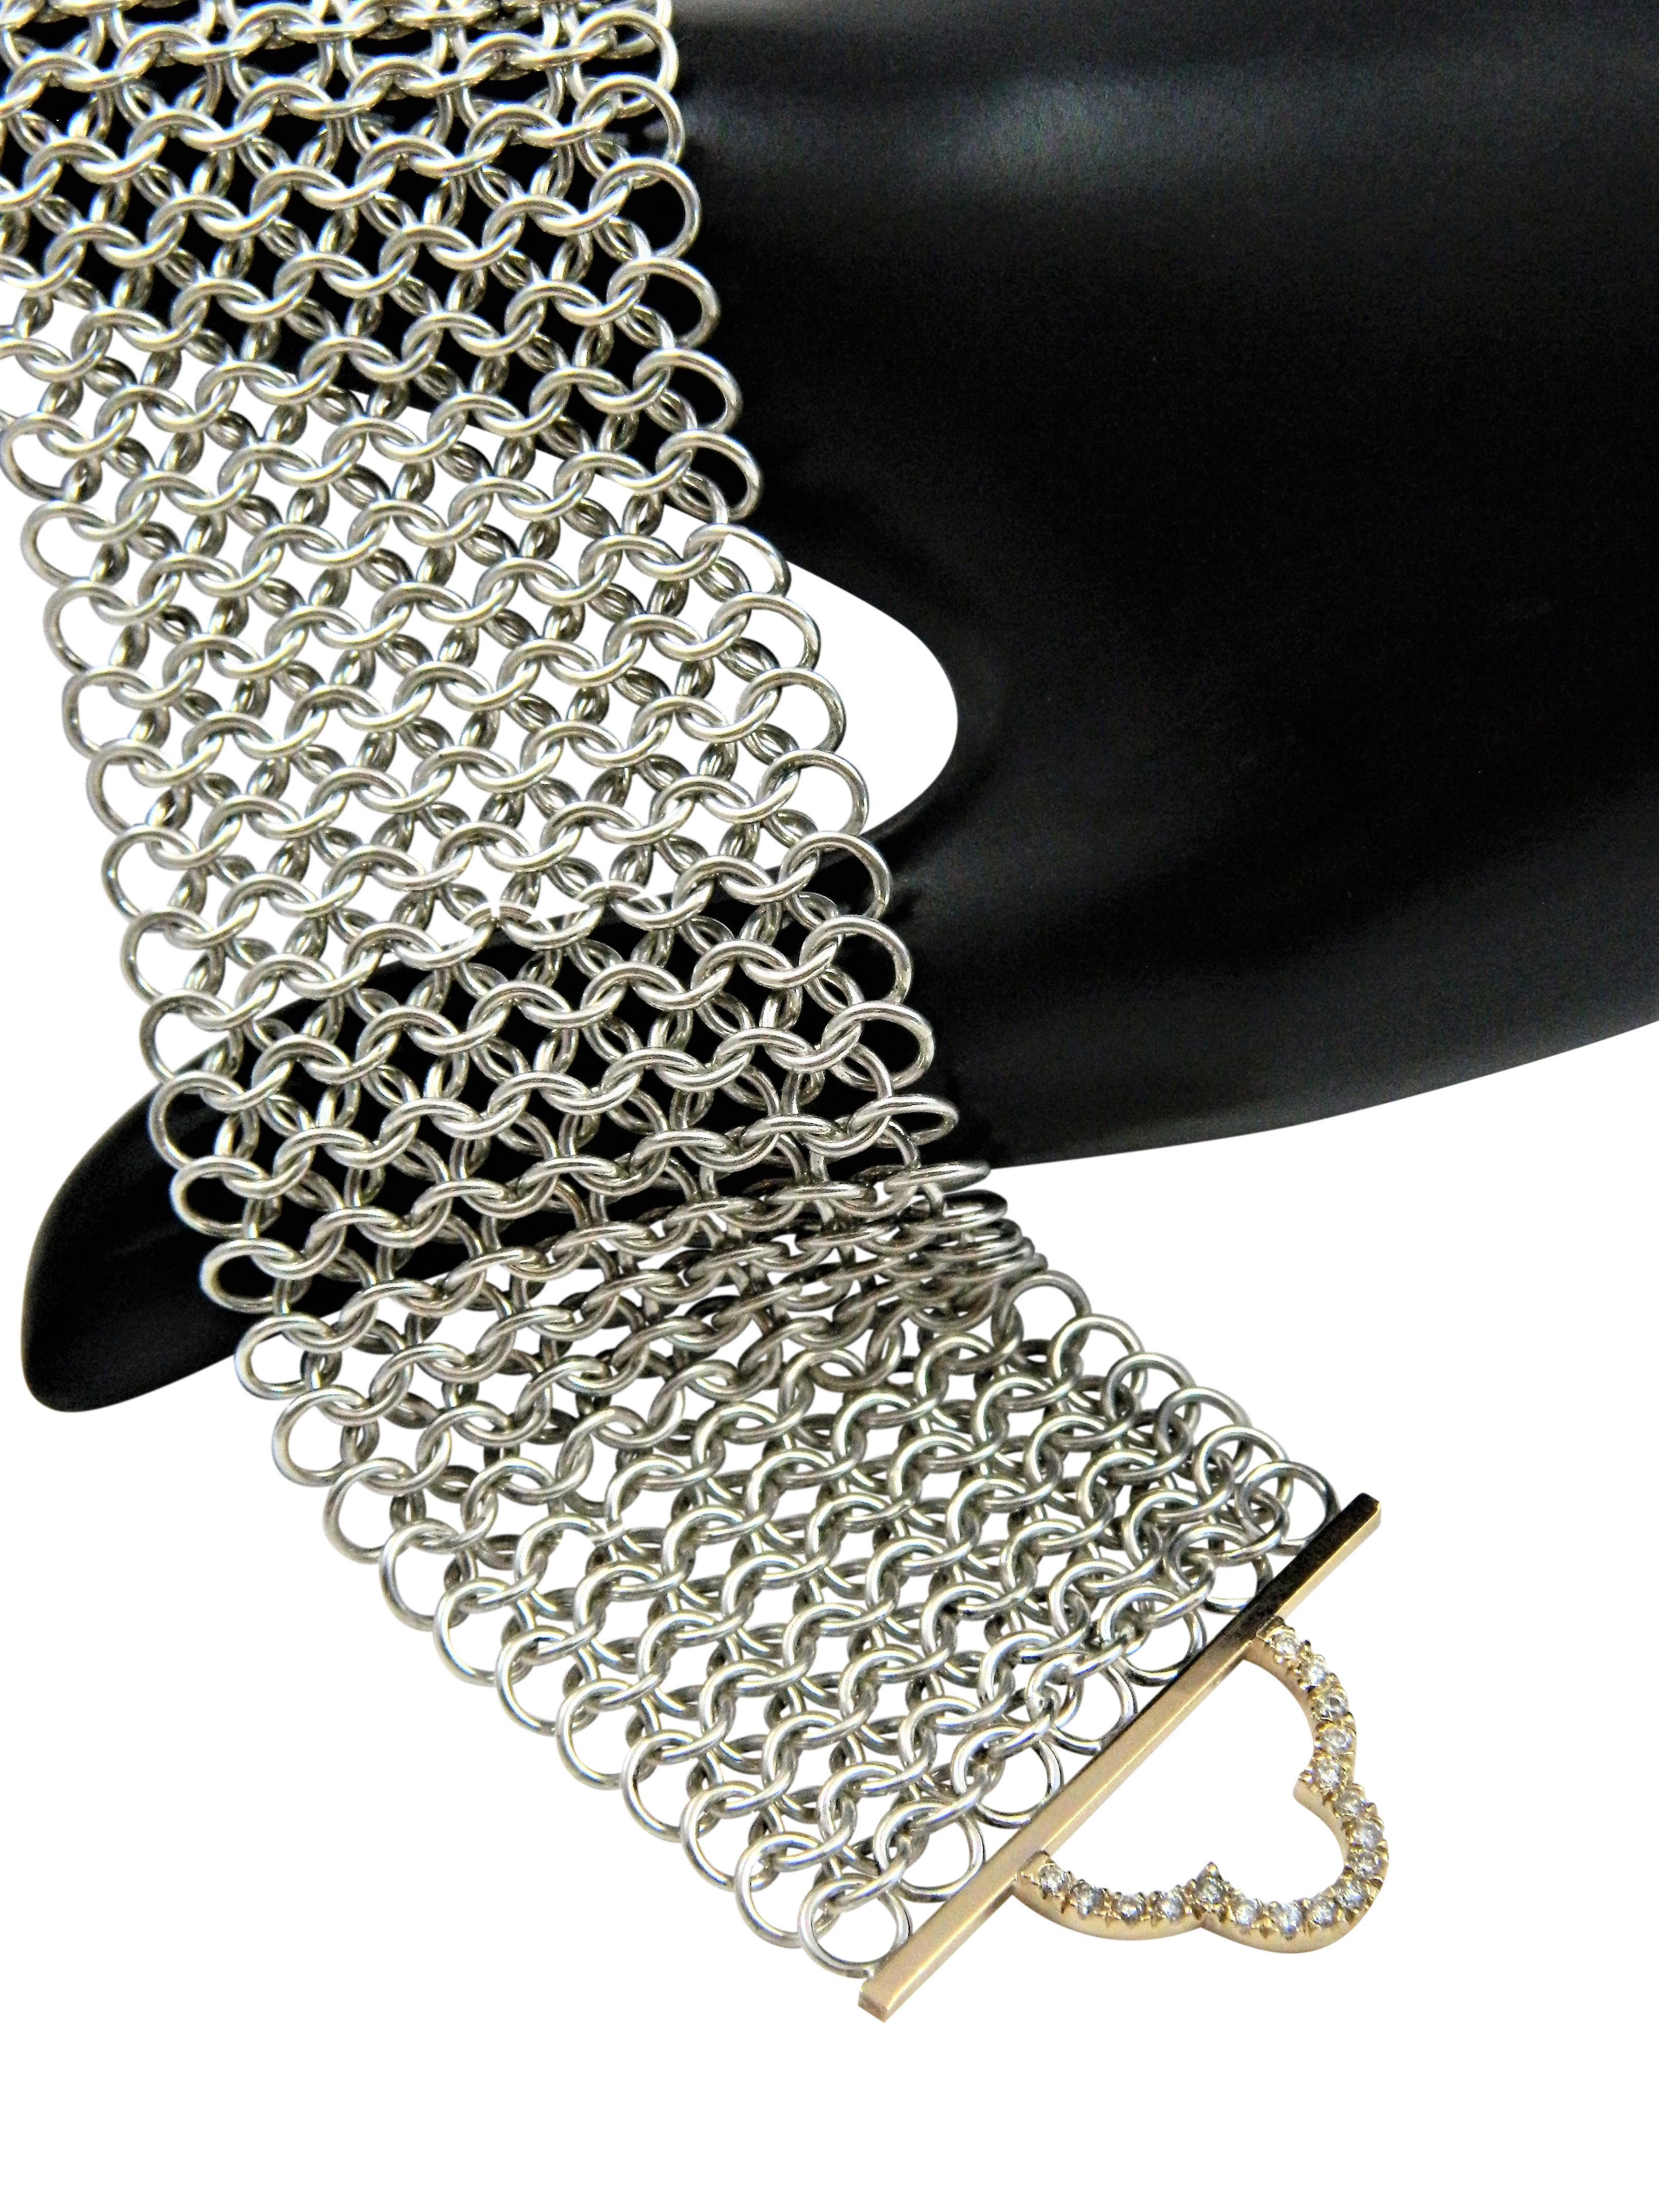 Brilliant Cut Deco Power Bracelet with Diamonds, Silver, 14K Gold and Japanese made Chainmail For Sale